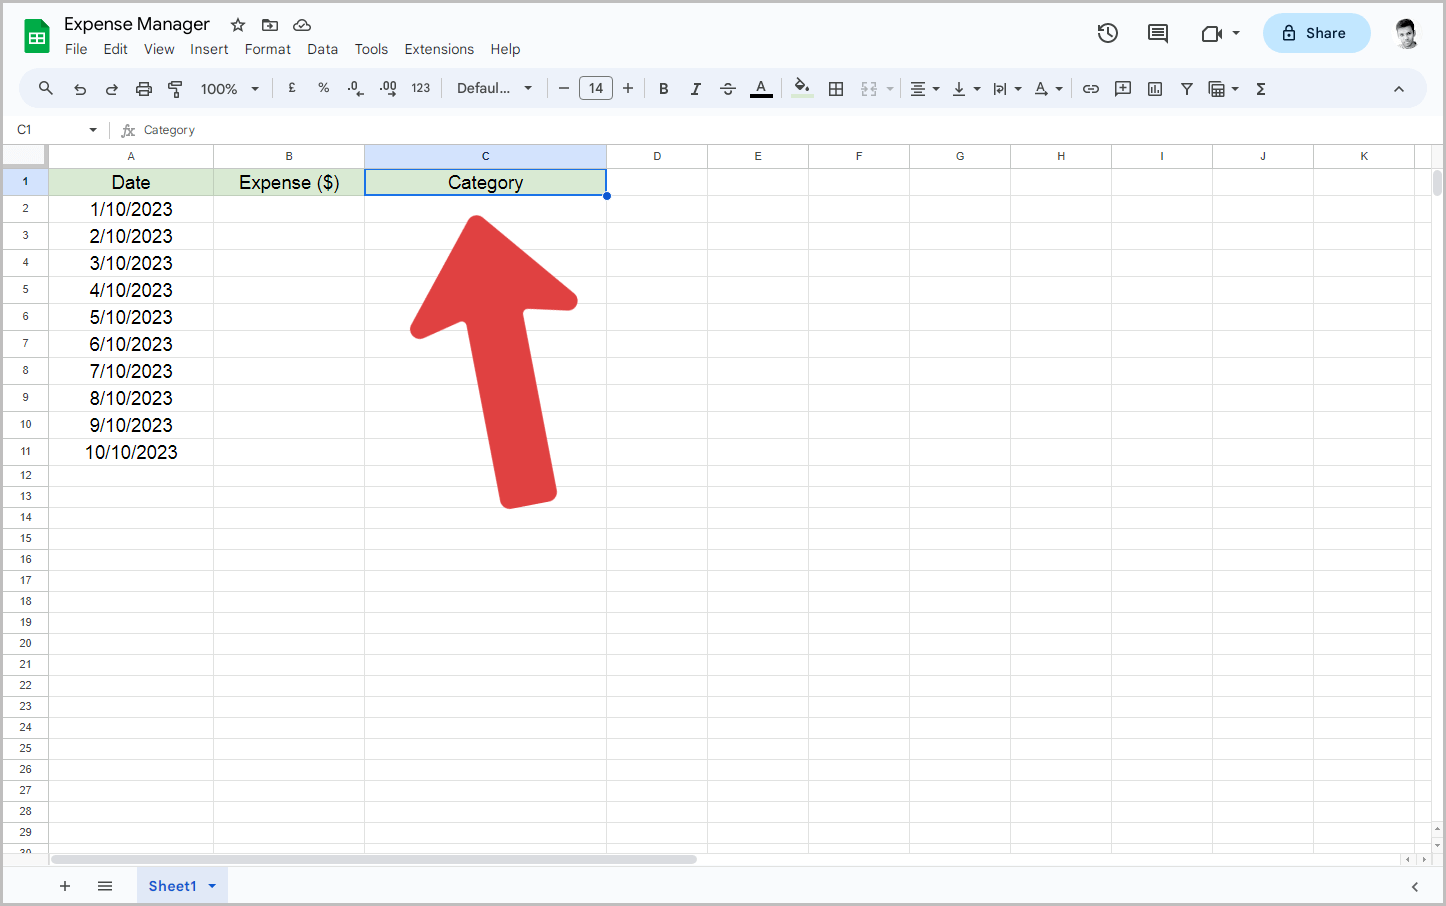 How to Add Categories in Google Sheets